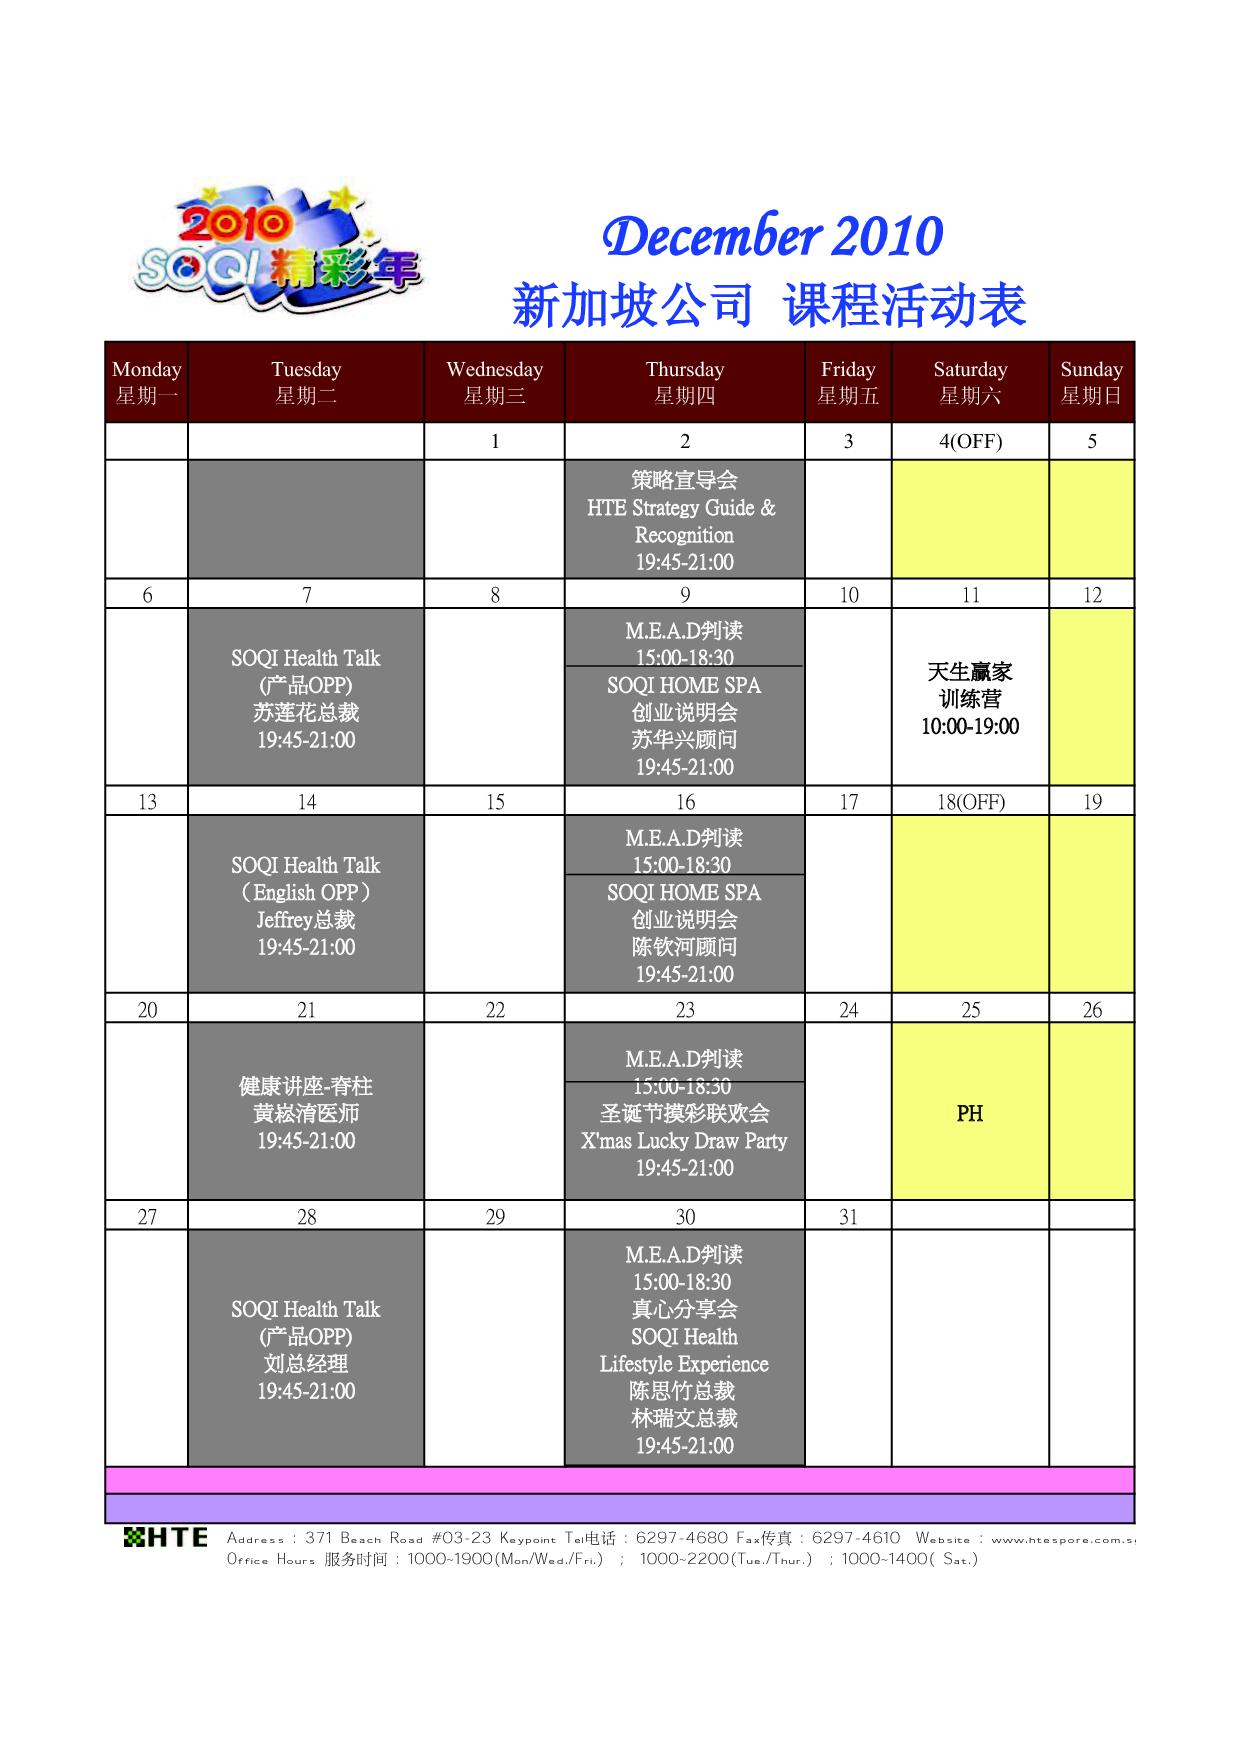 Activities Time Table for December 2010